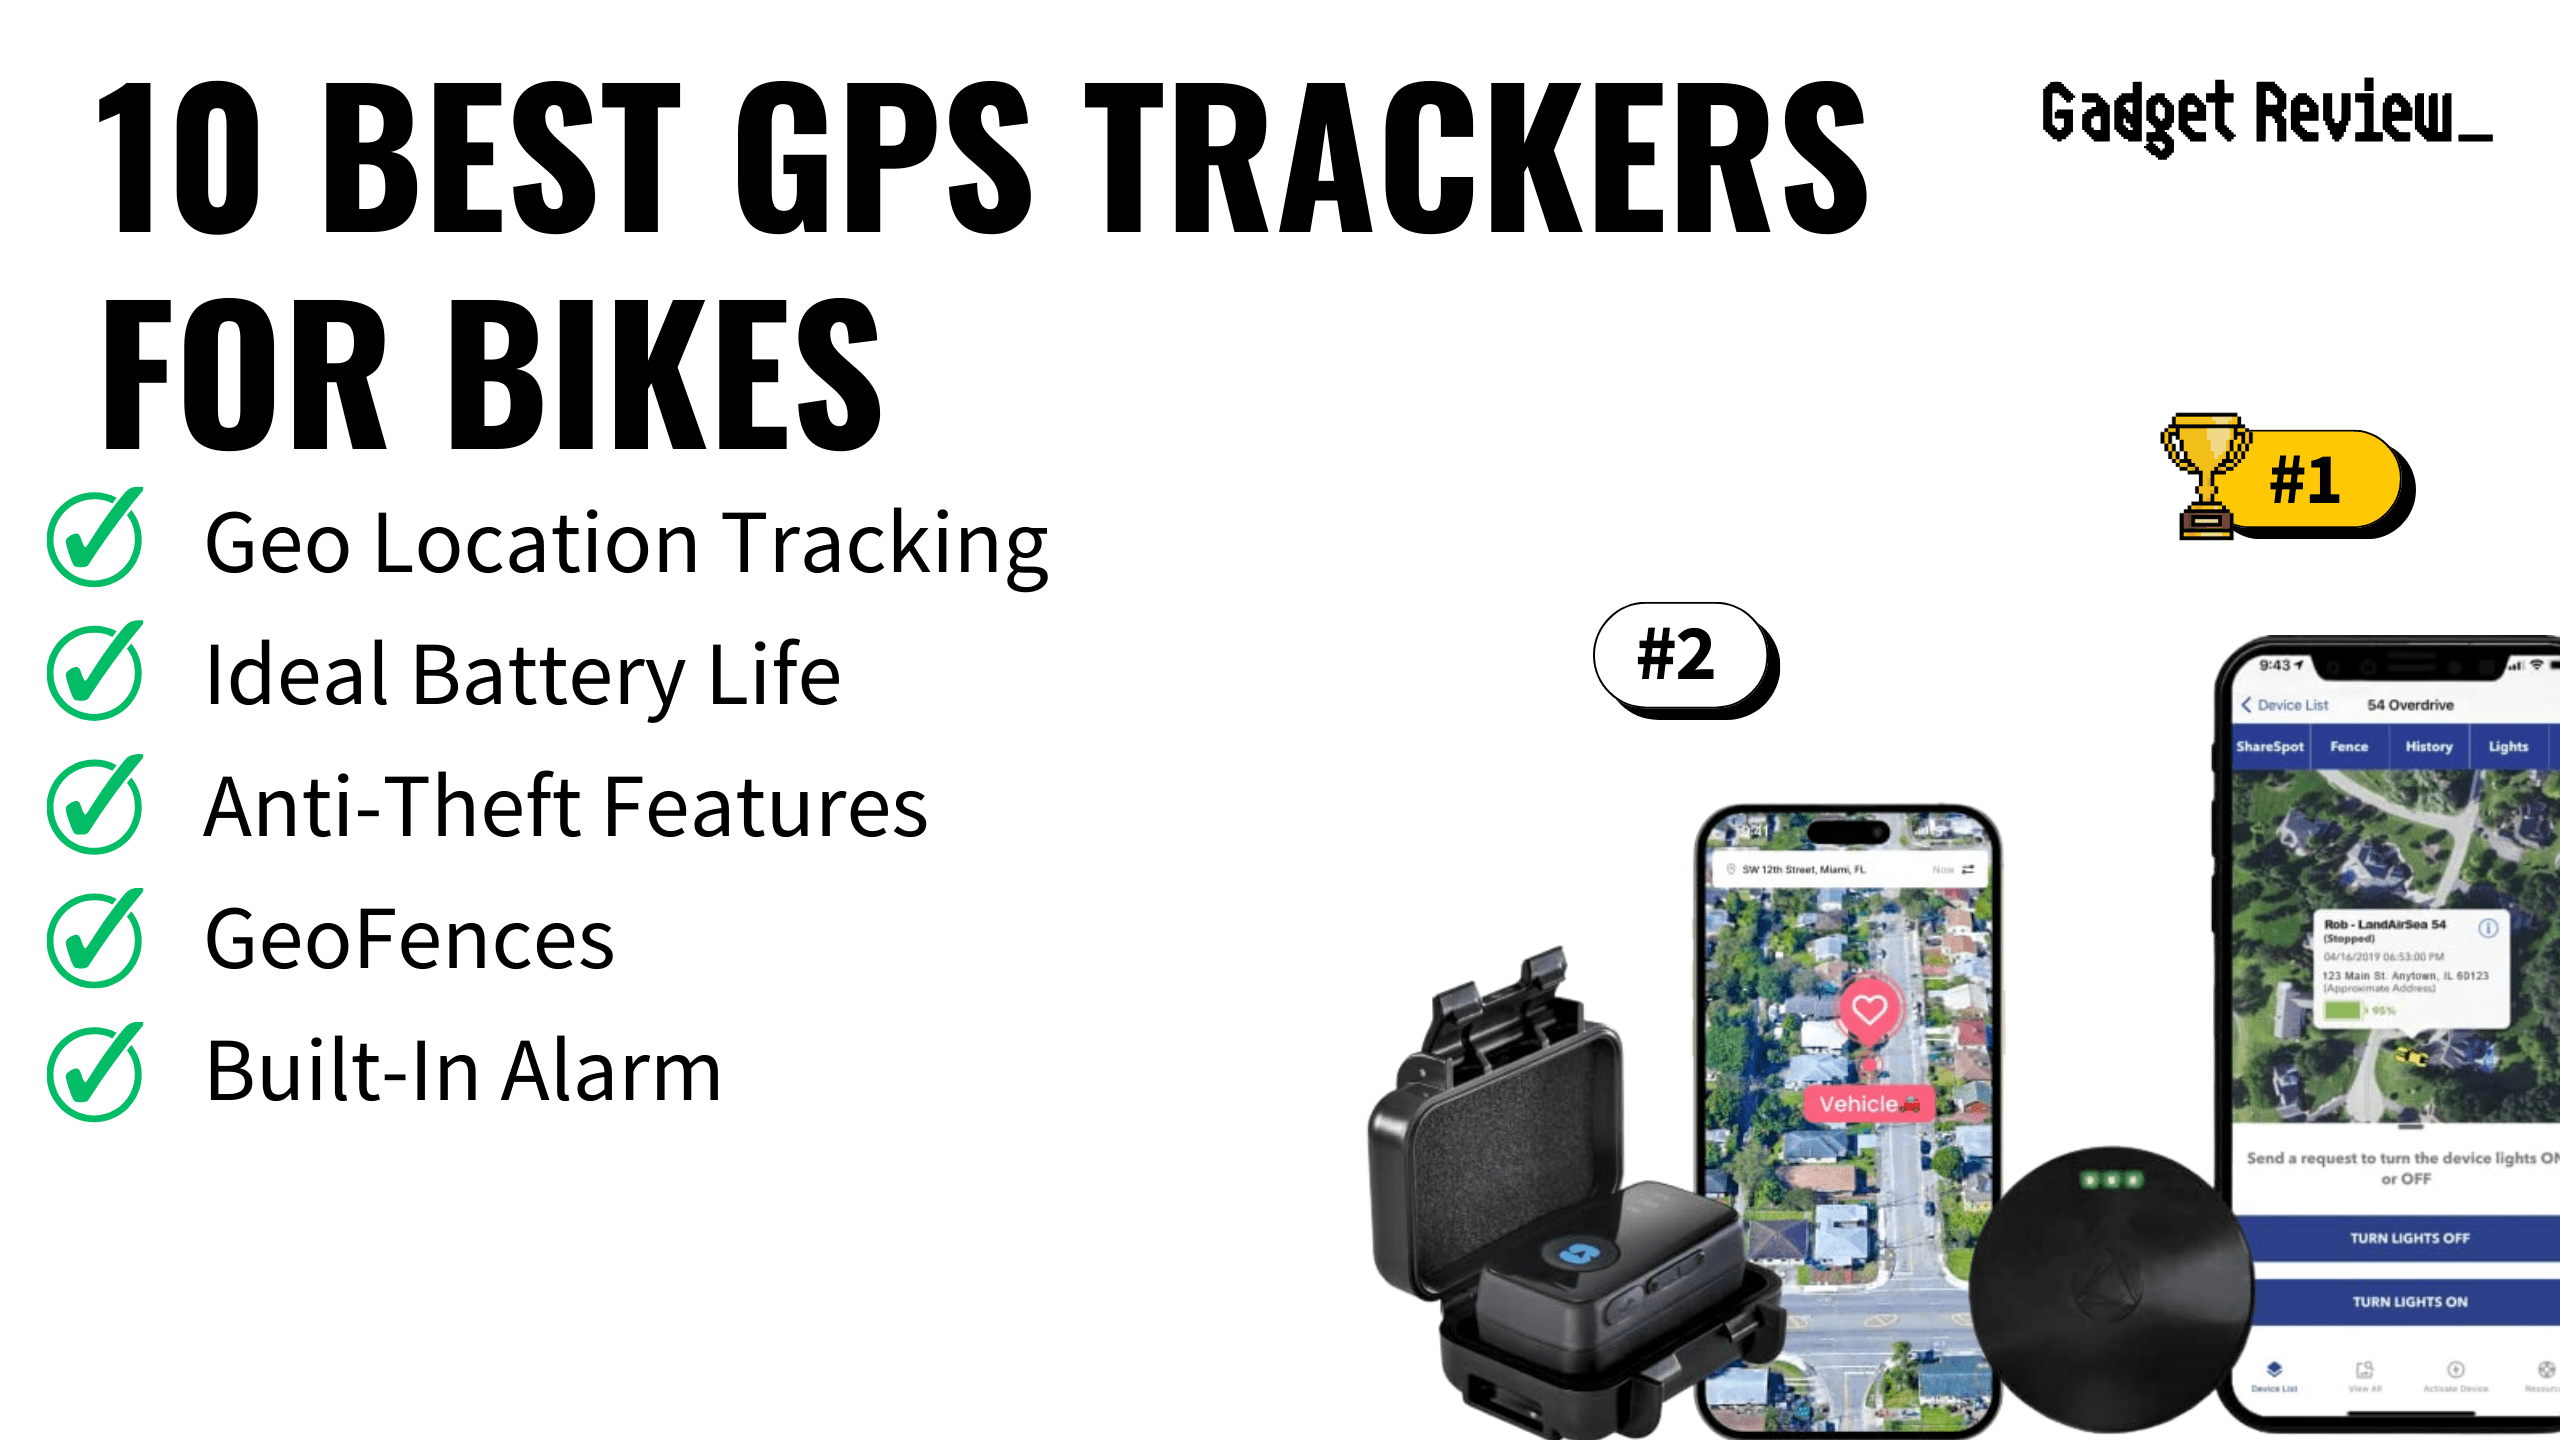 10 Best GPS Trackers for Bikes